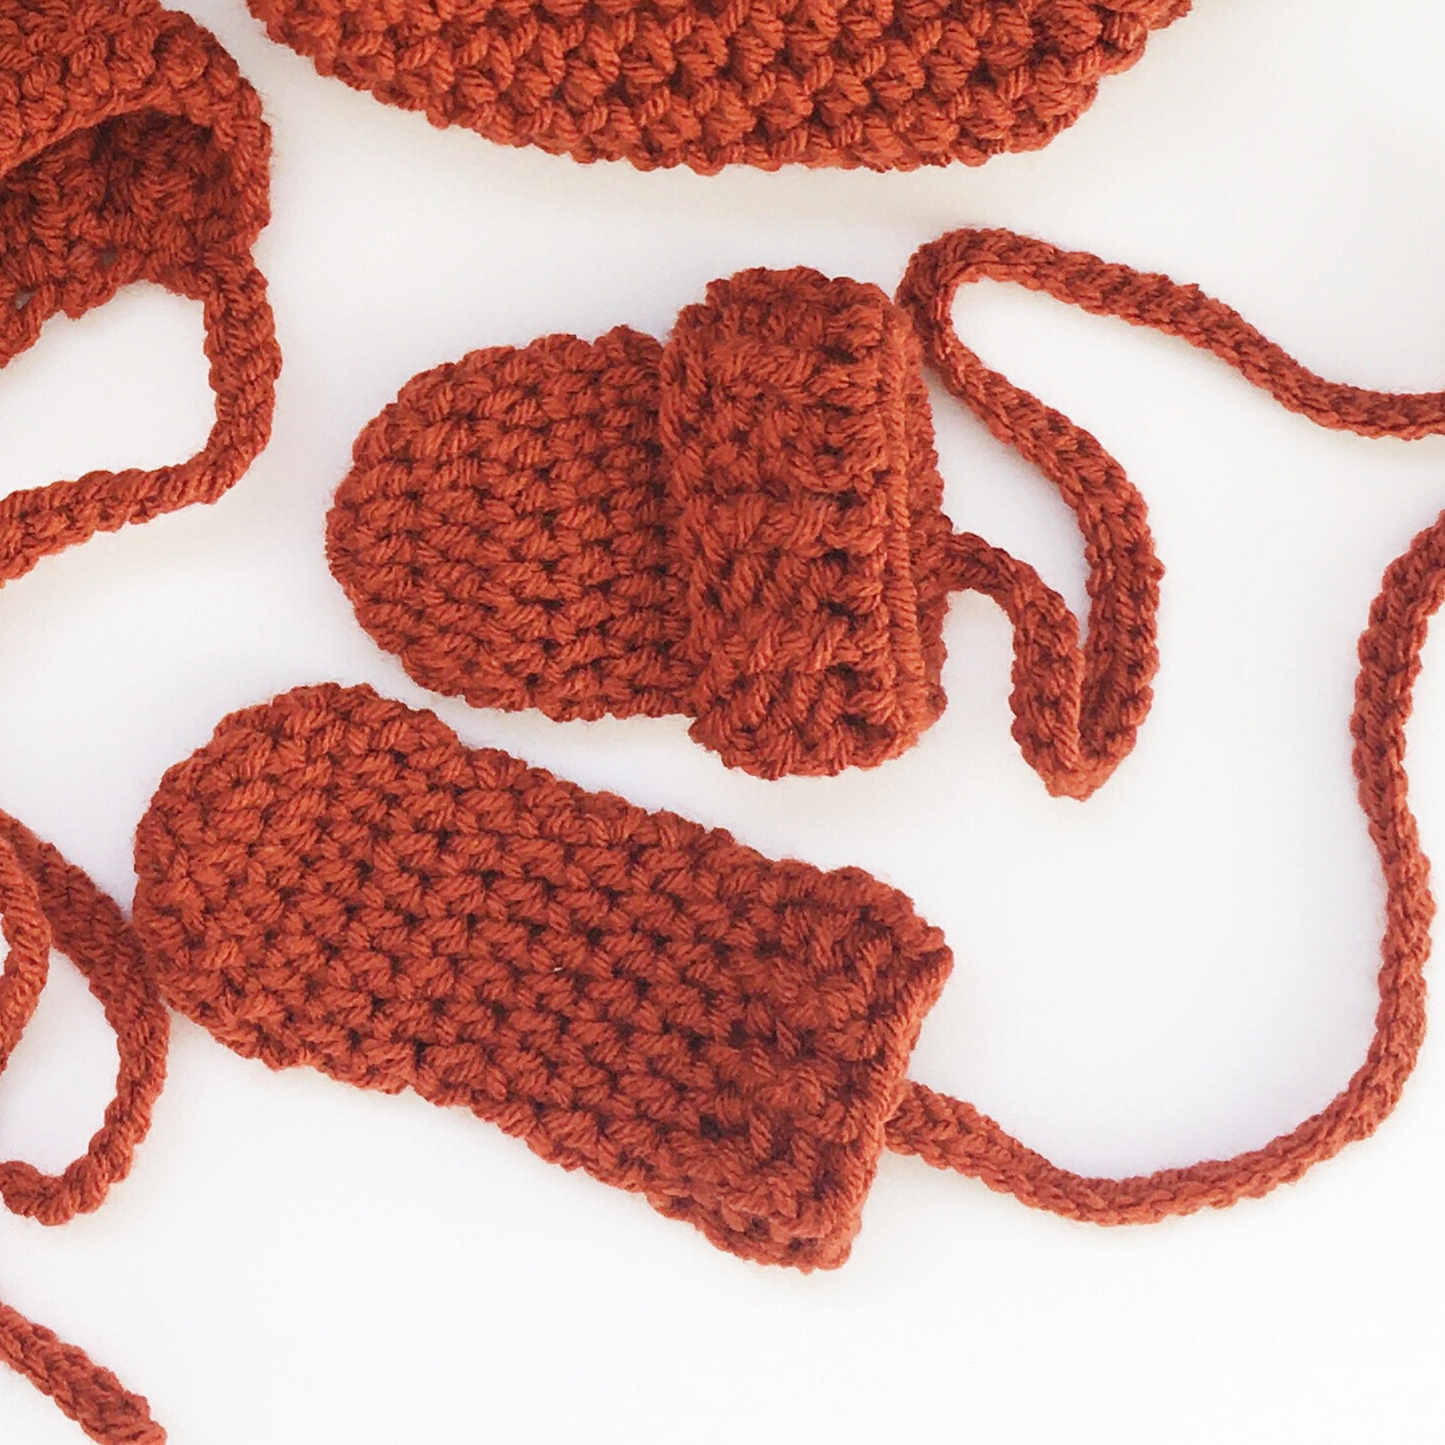 Vintage style Mittens on a string